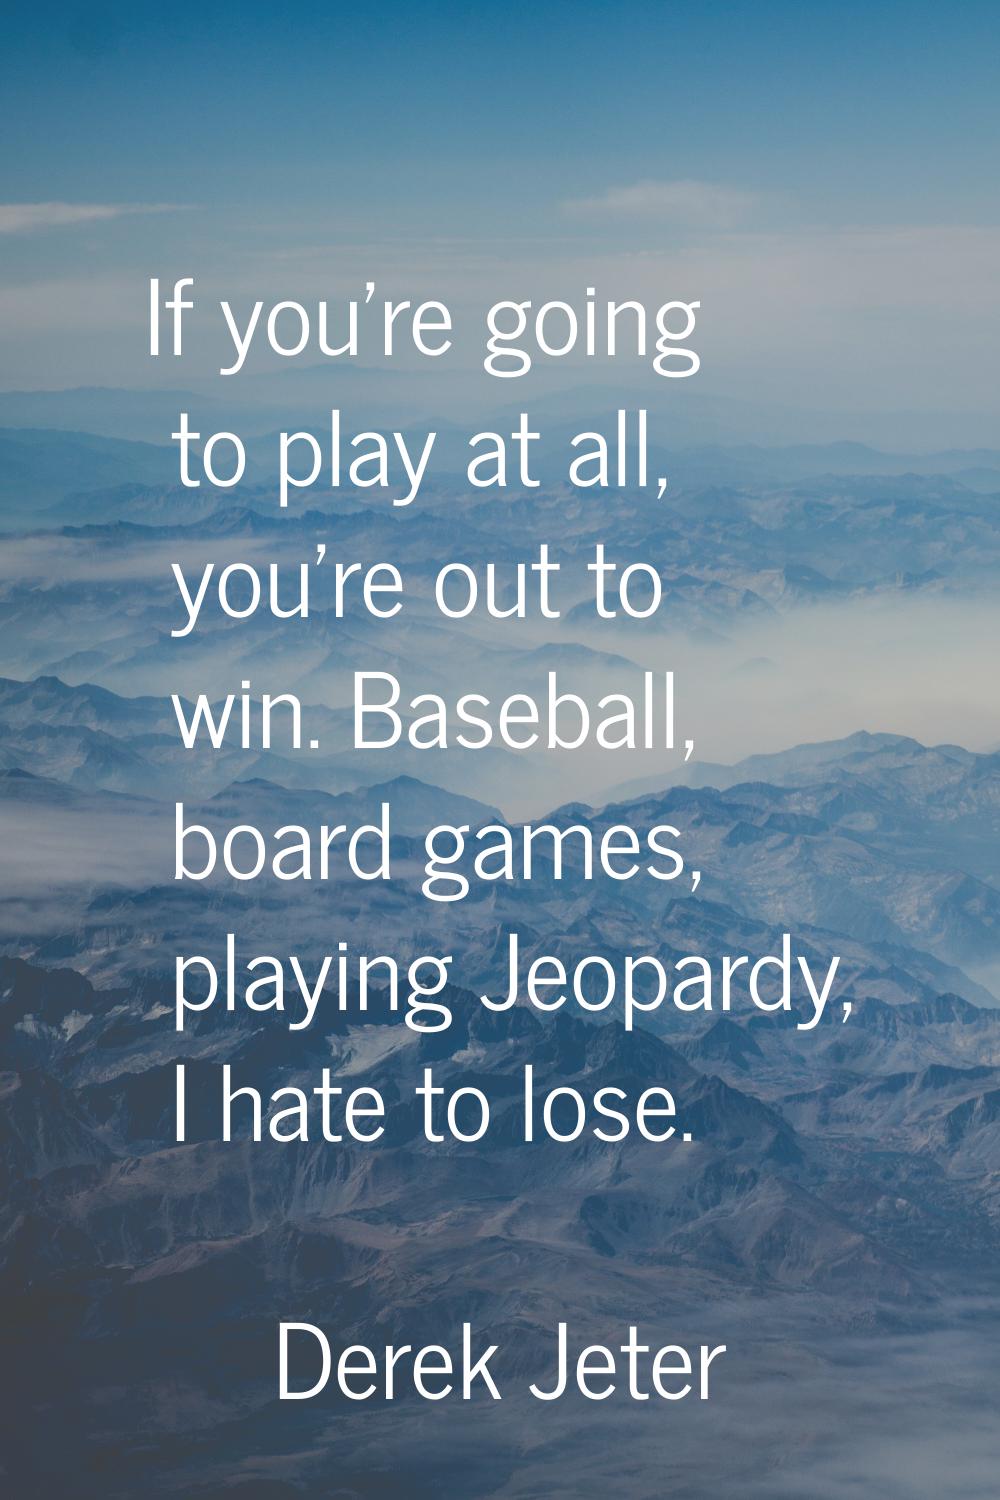 If you're going to play at all, you're out to win. Baseball, board games, playing Jeopardy, I hate 